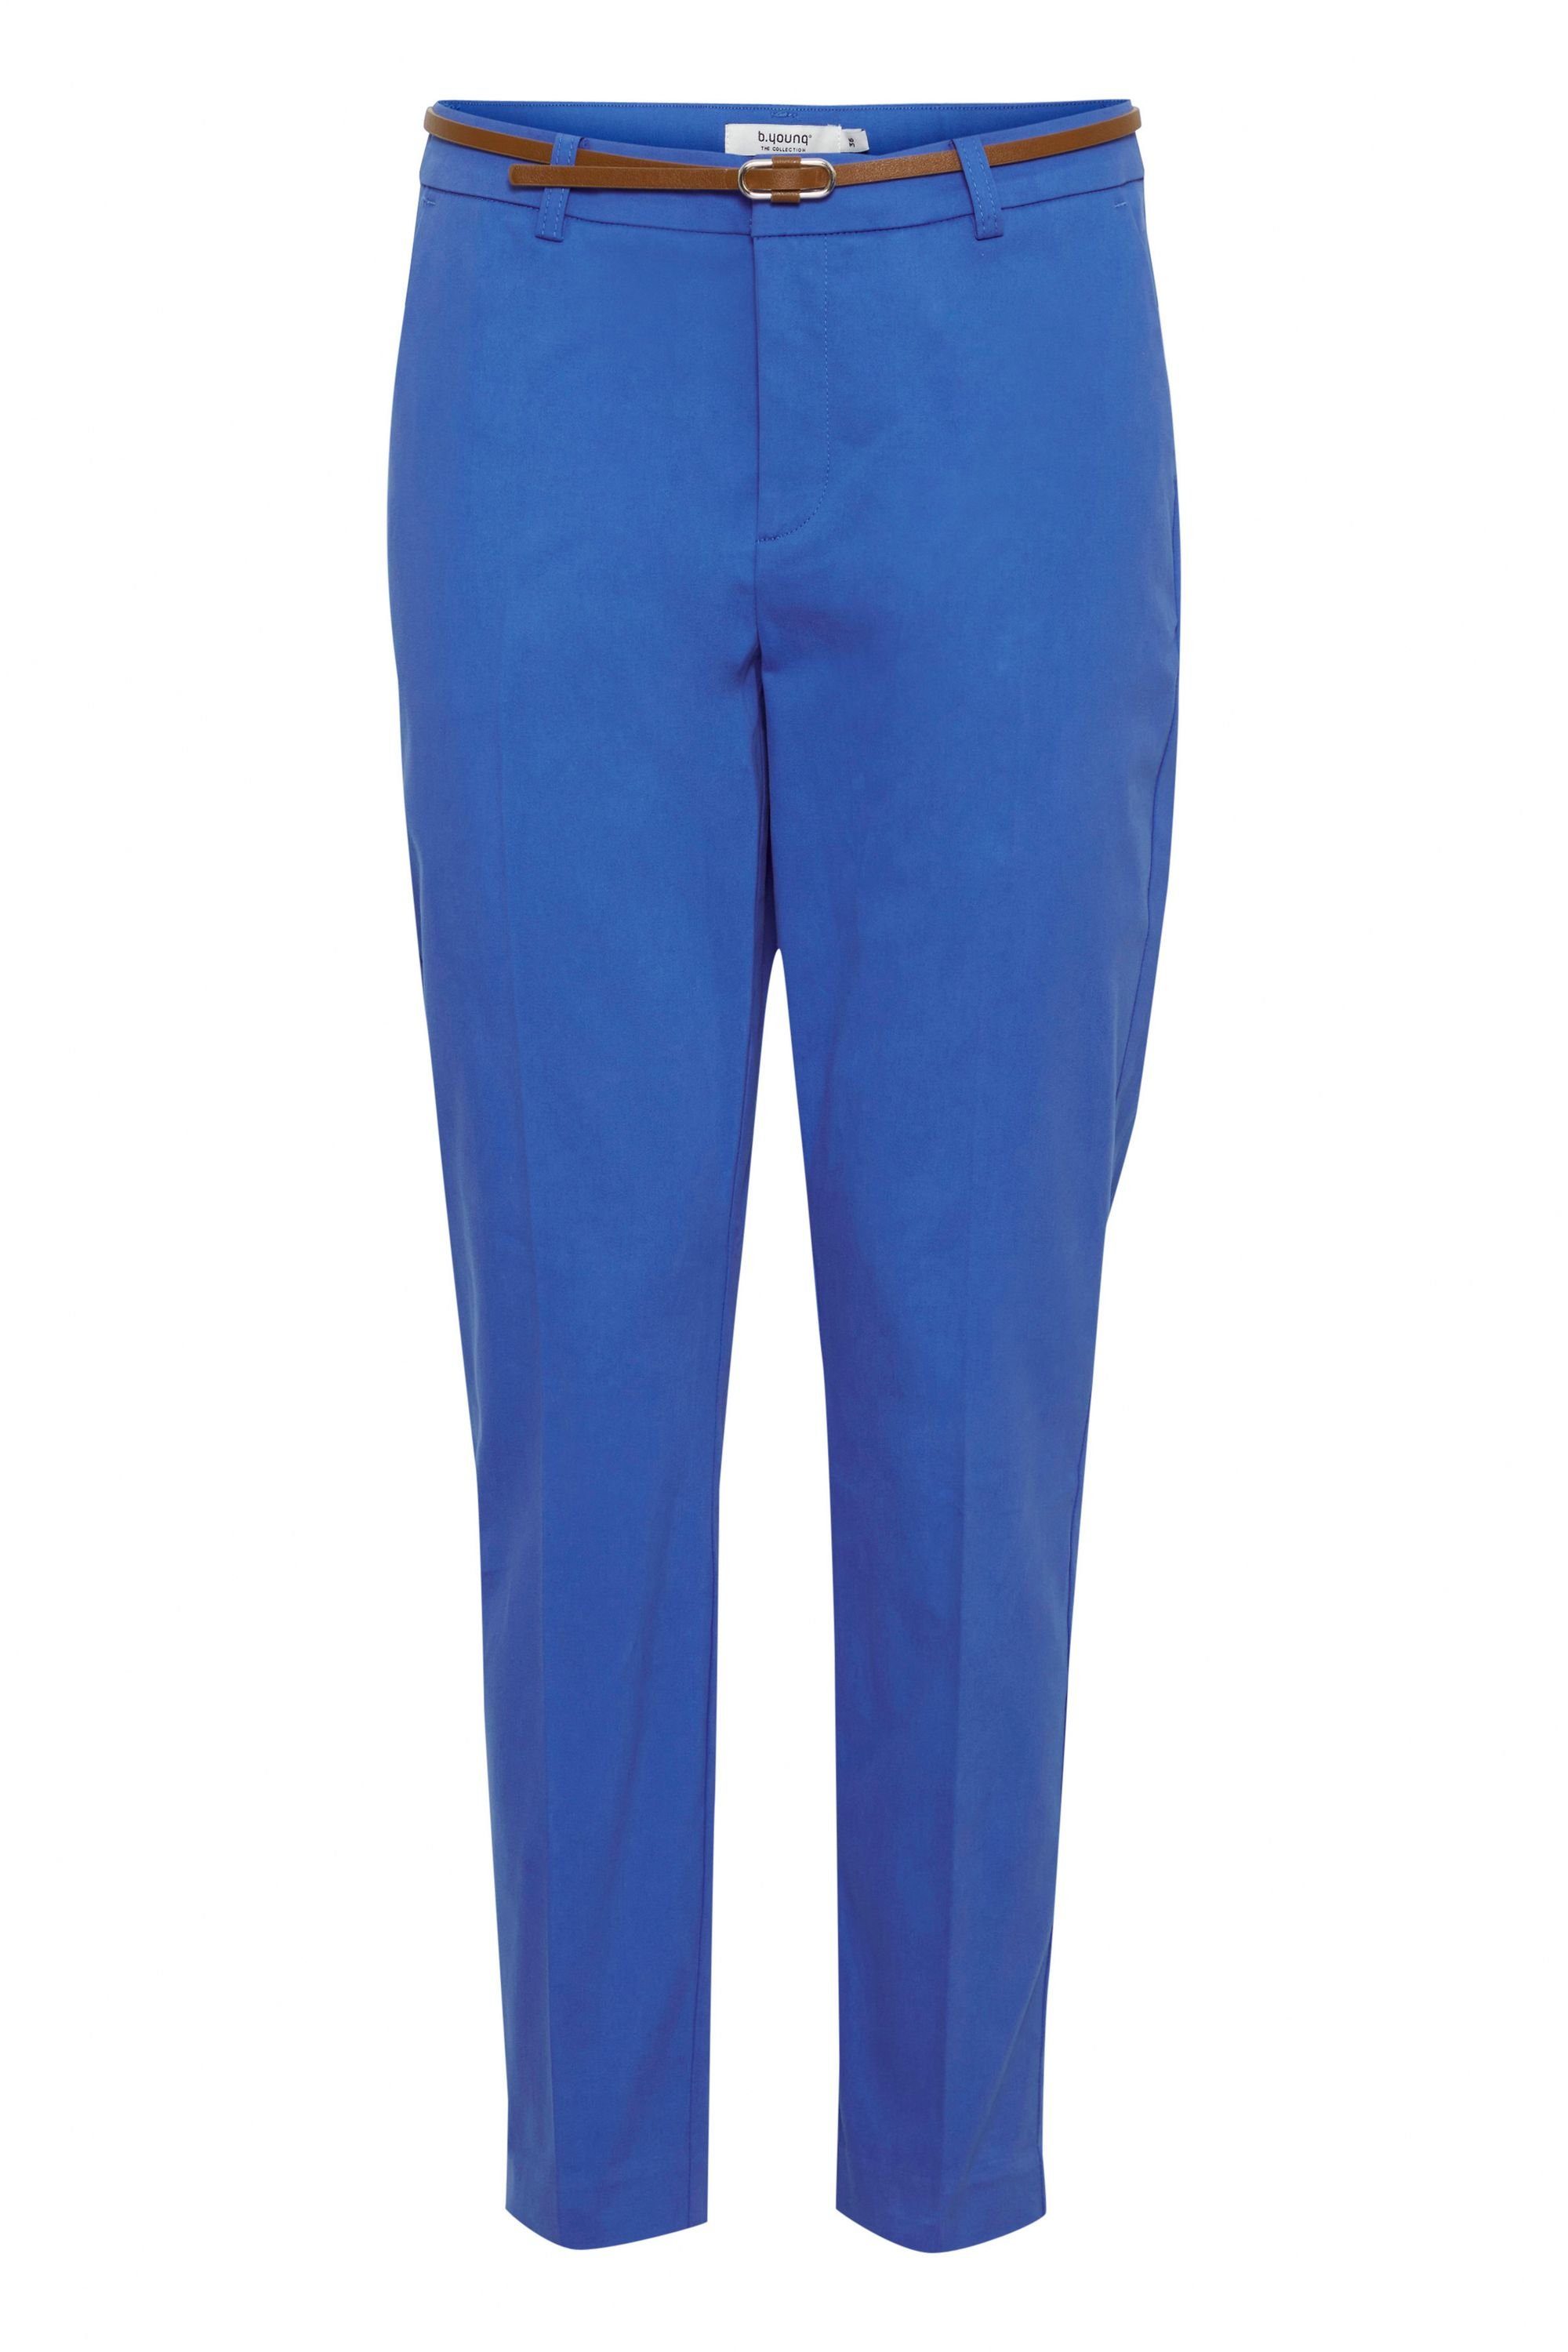 BYDays Blue Strong cigaret Chinohose - (184051) 20803473 pants 2 b.young